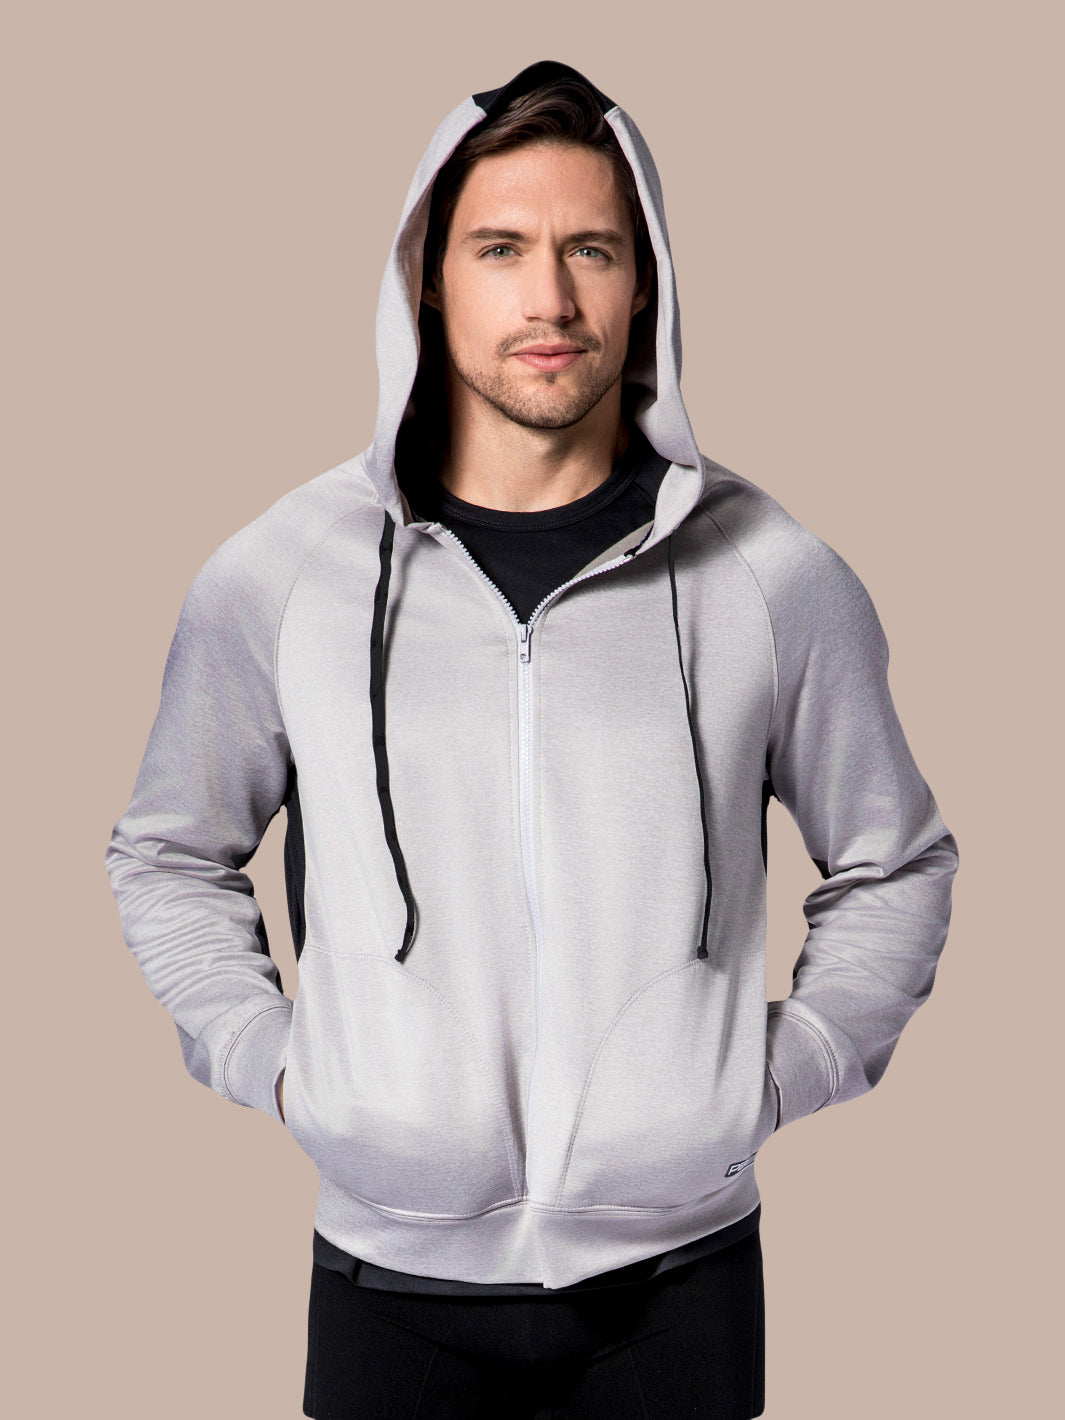 Model wearing a PB5star Performance Full Zip Hoodie in grey heather with hood up and black zipper.